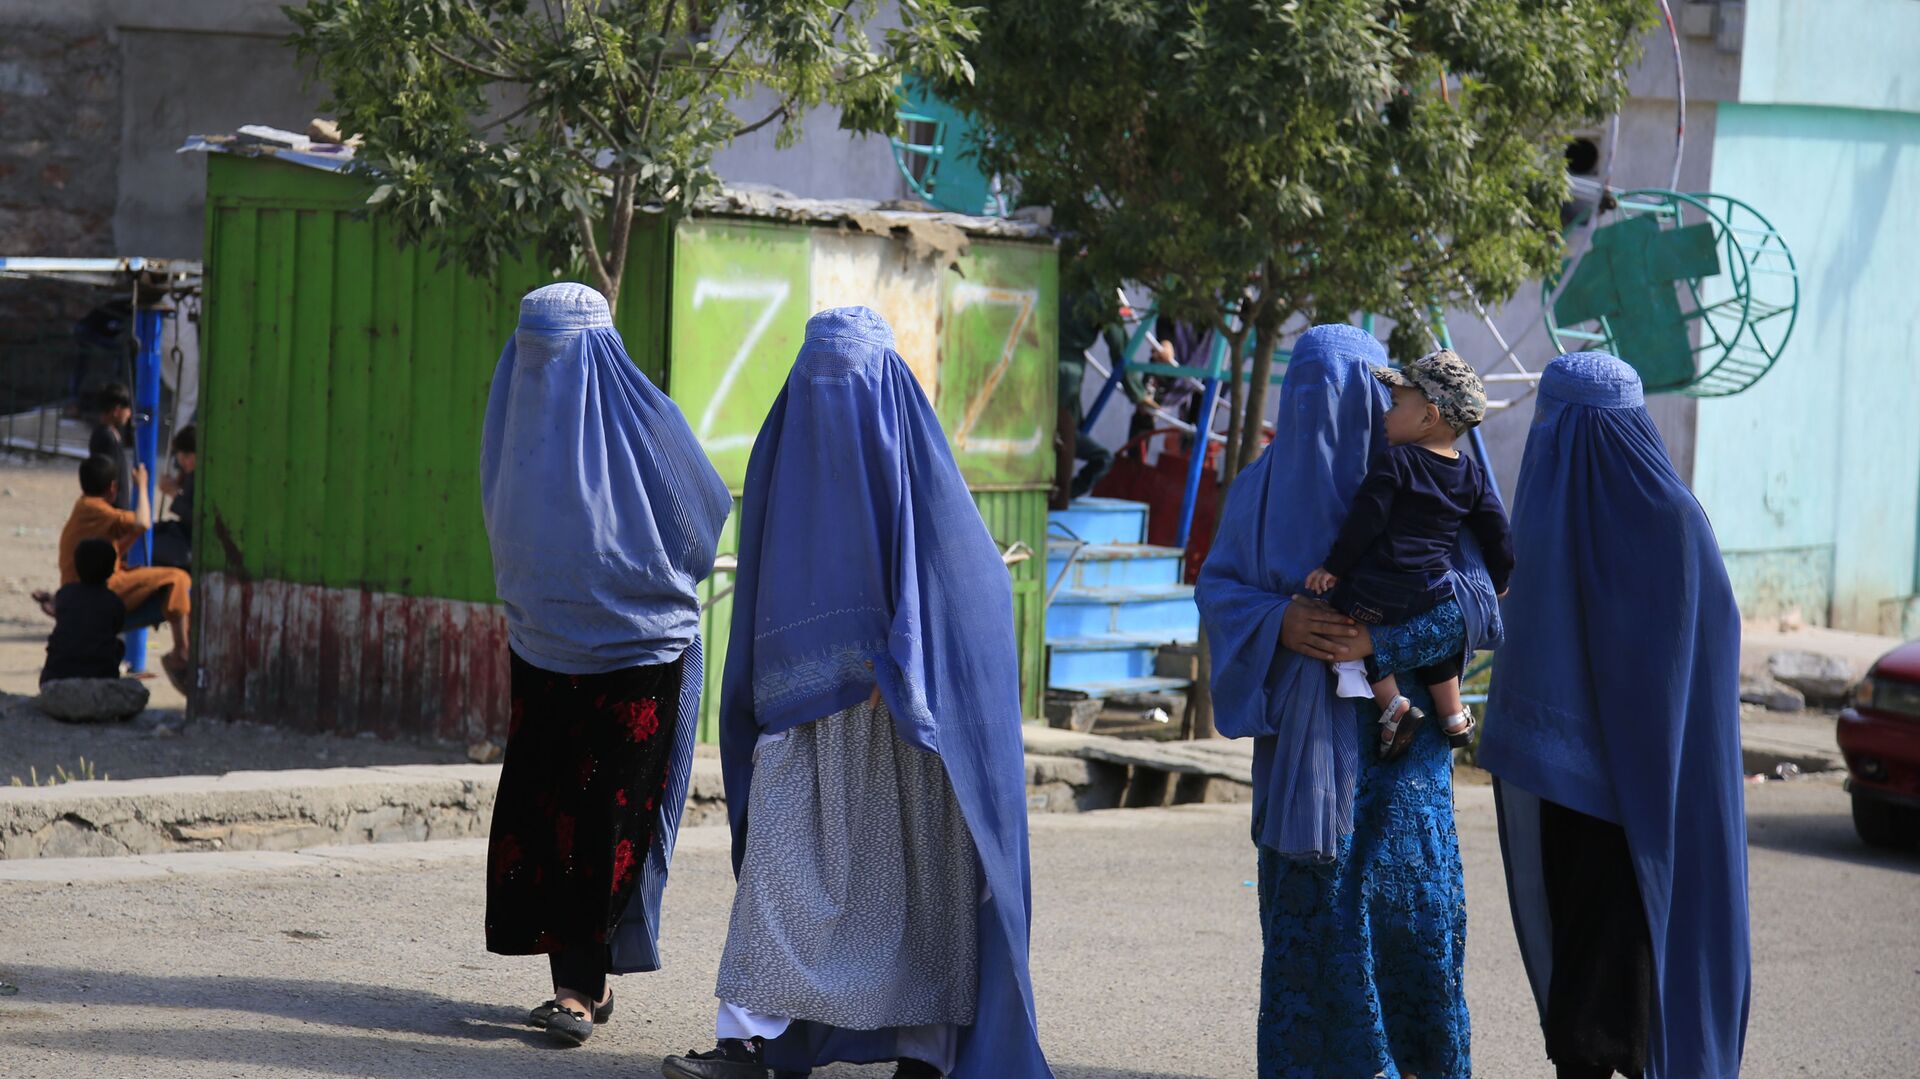 Afghan women walk on the road during the first day of Eid al-Fitr in Kabul, Afghanistan, Thursday, May 13, 2021 - Sputnik International, 1920, 22.08.2021